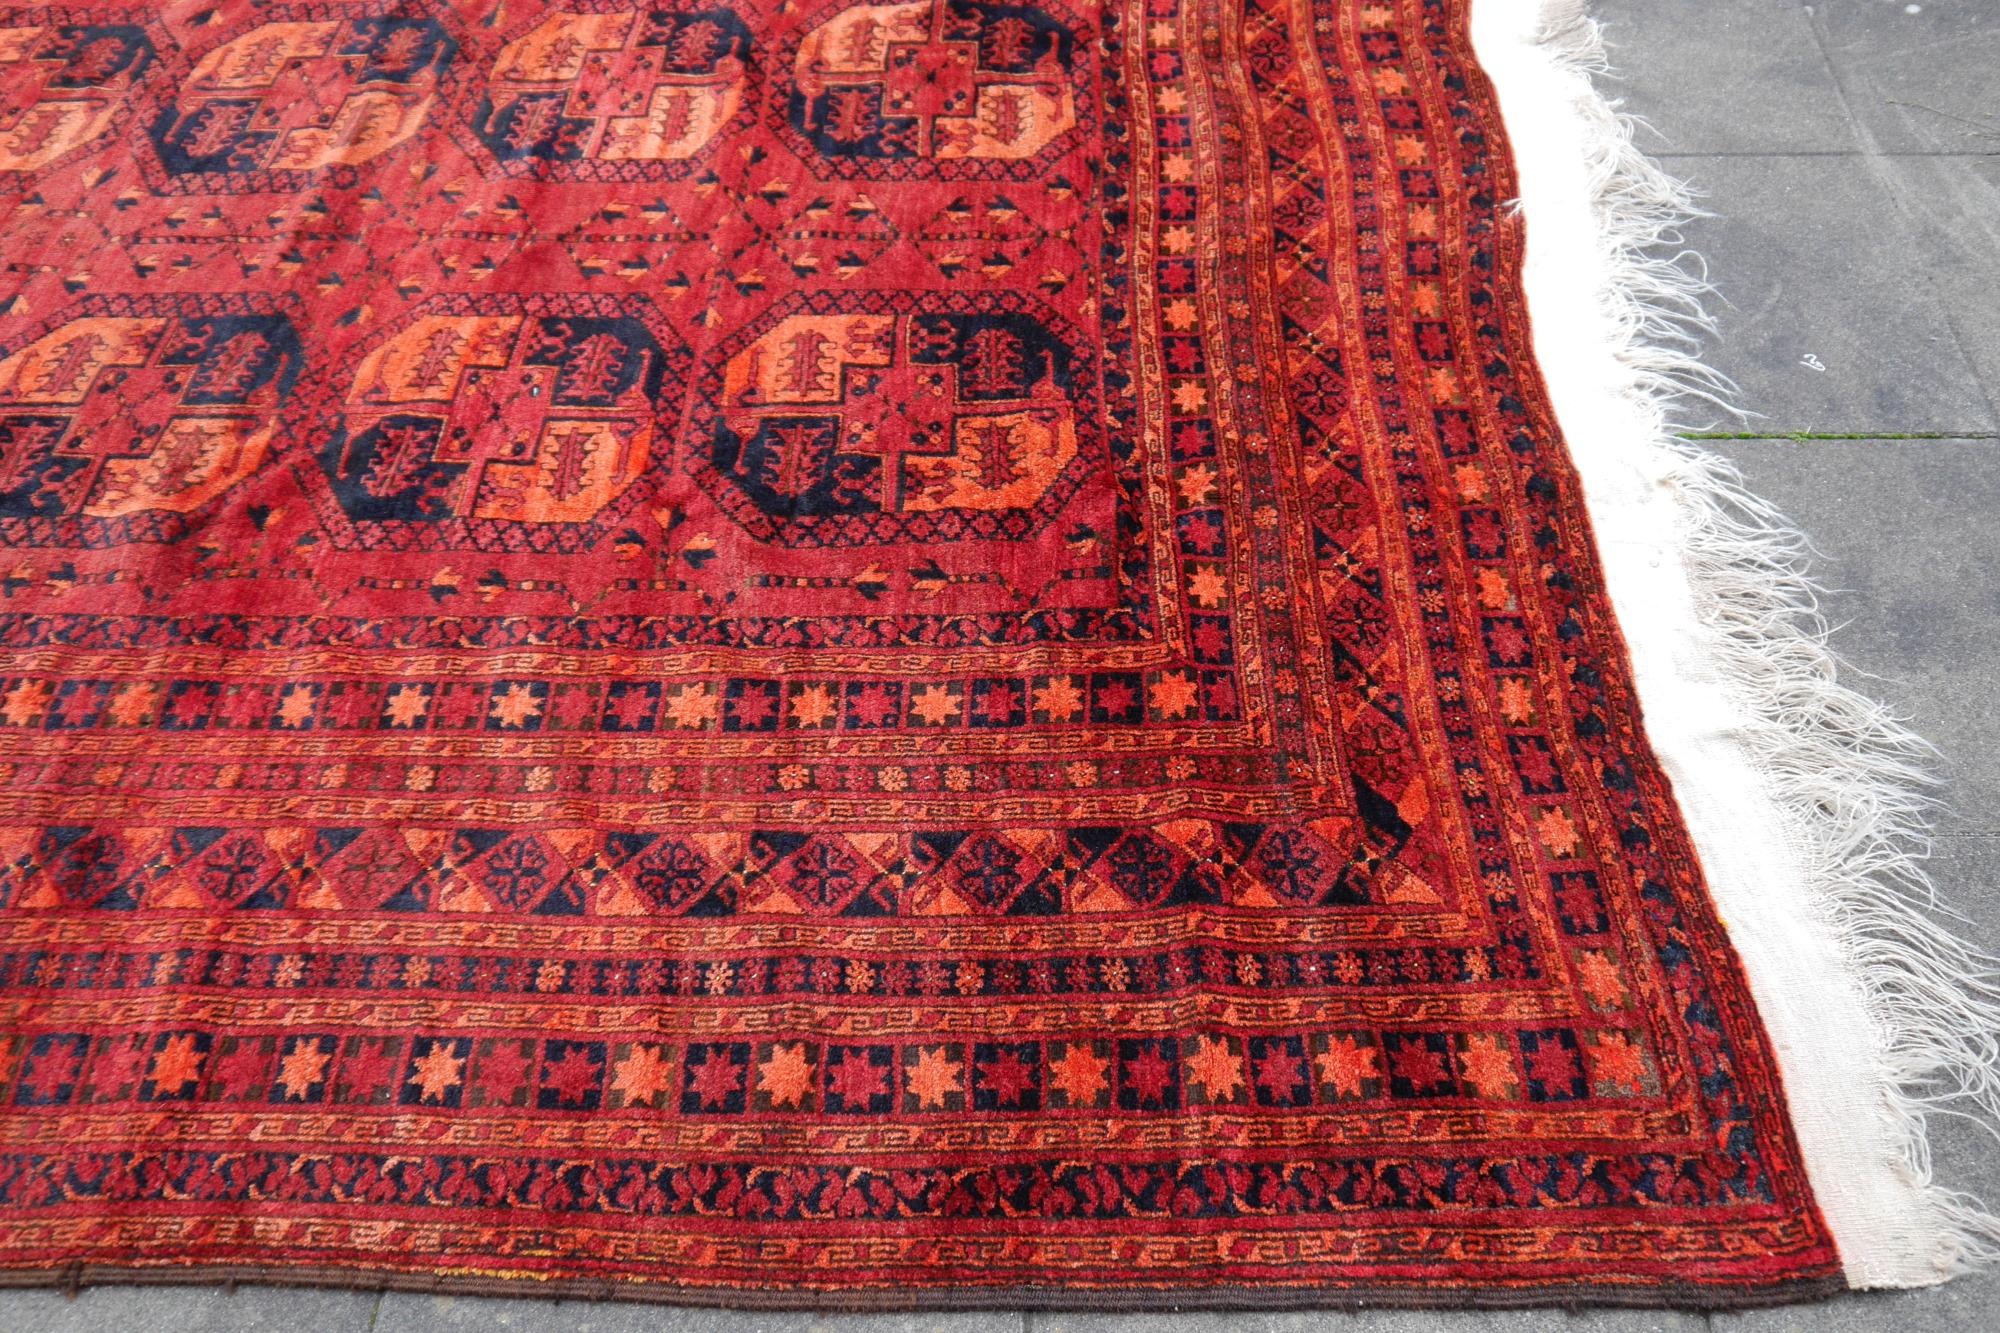 Ersari rug 11.2 x 15.5 ft oversized tribal Turkoman hand knotted antique carpet In Good Condition For Sale In Lohr, Bavaria, DE